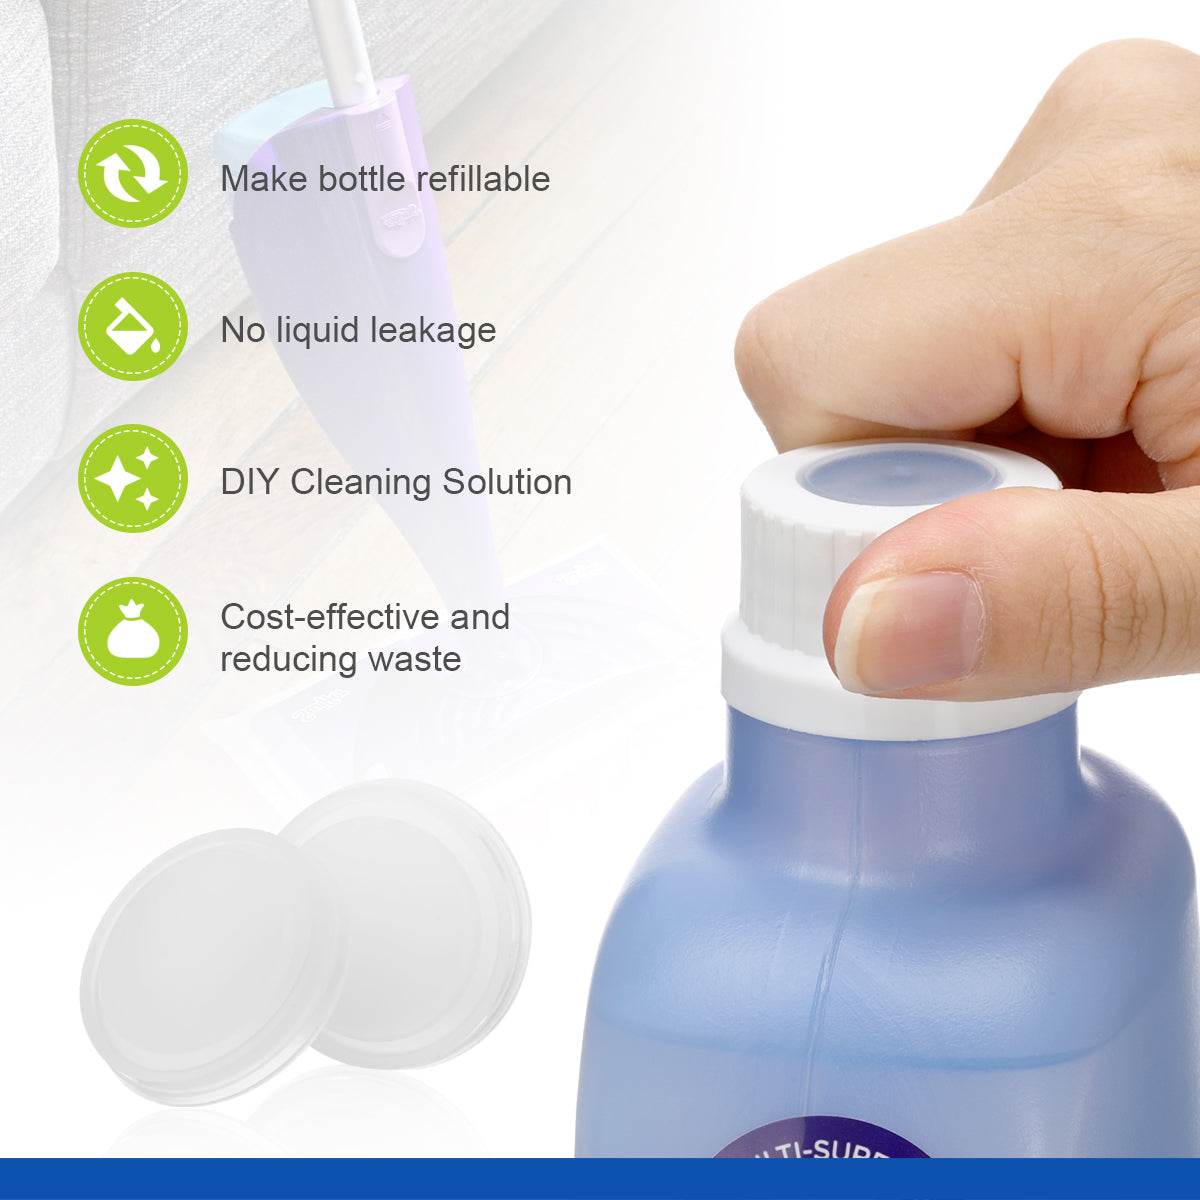 Replace the punctured disposable silicone gasket, making the bottle to be reused